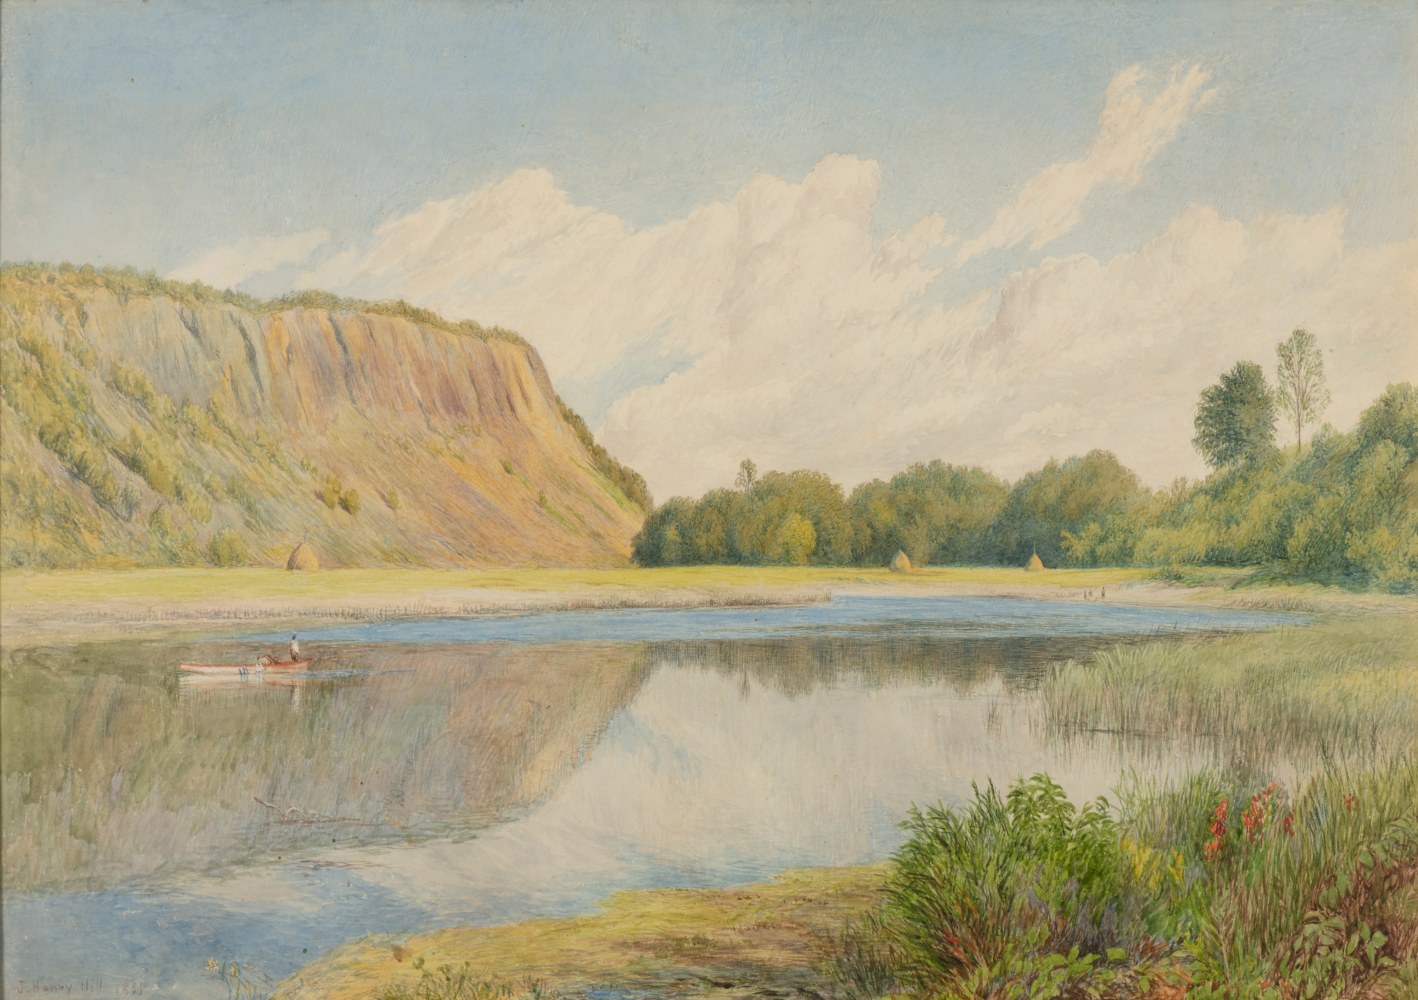 John Henry Hill (1839–1922). Marsh Landscape, 1865. Watercolor on paper, 10 1/4 x 15 1/4 in. Signed and dated lower left: J. Henry Hill 1865